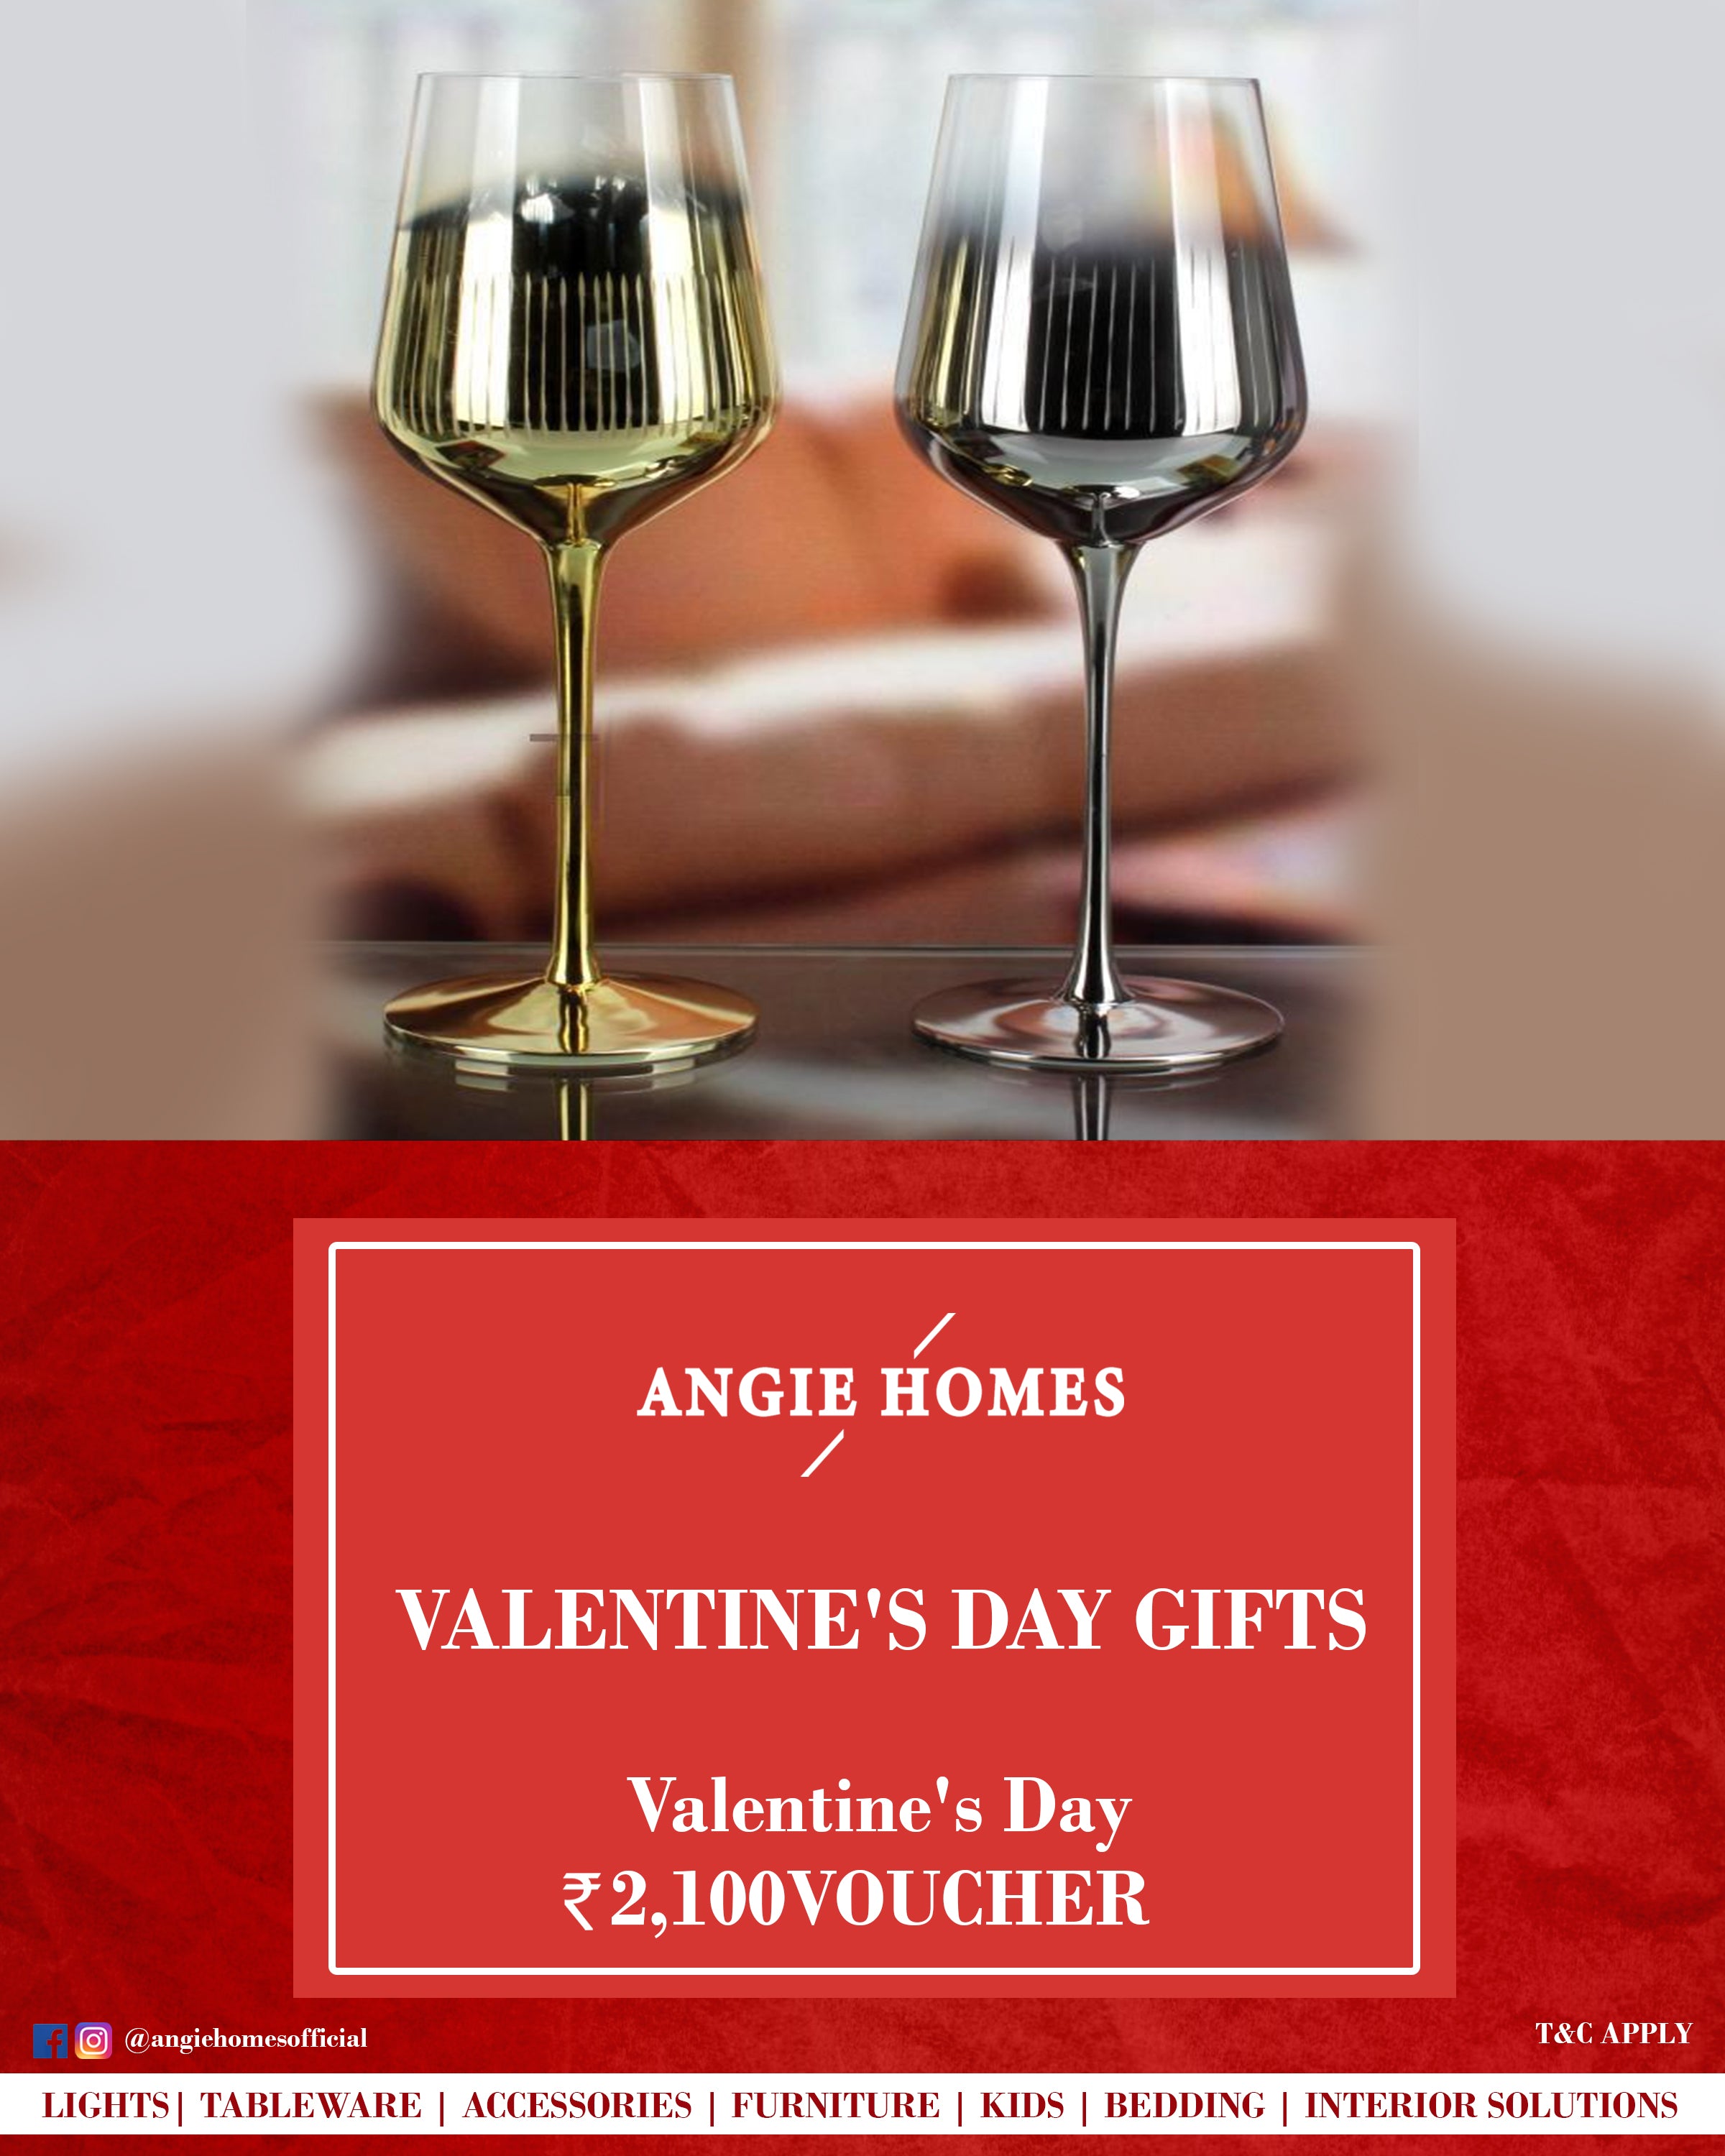 Online Happy Valentine's Day Gift Card Voucher for Wine Glasses ANGIE HOMES